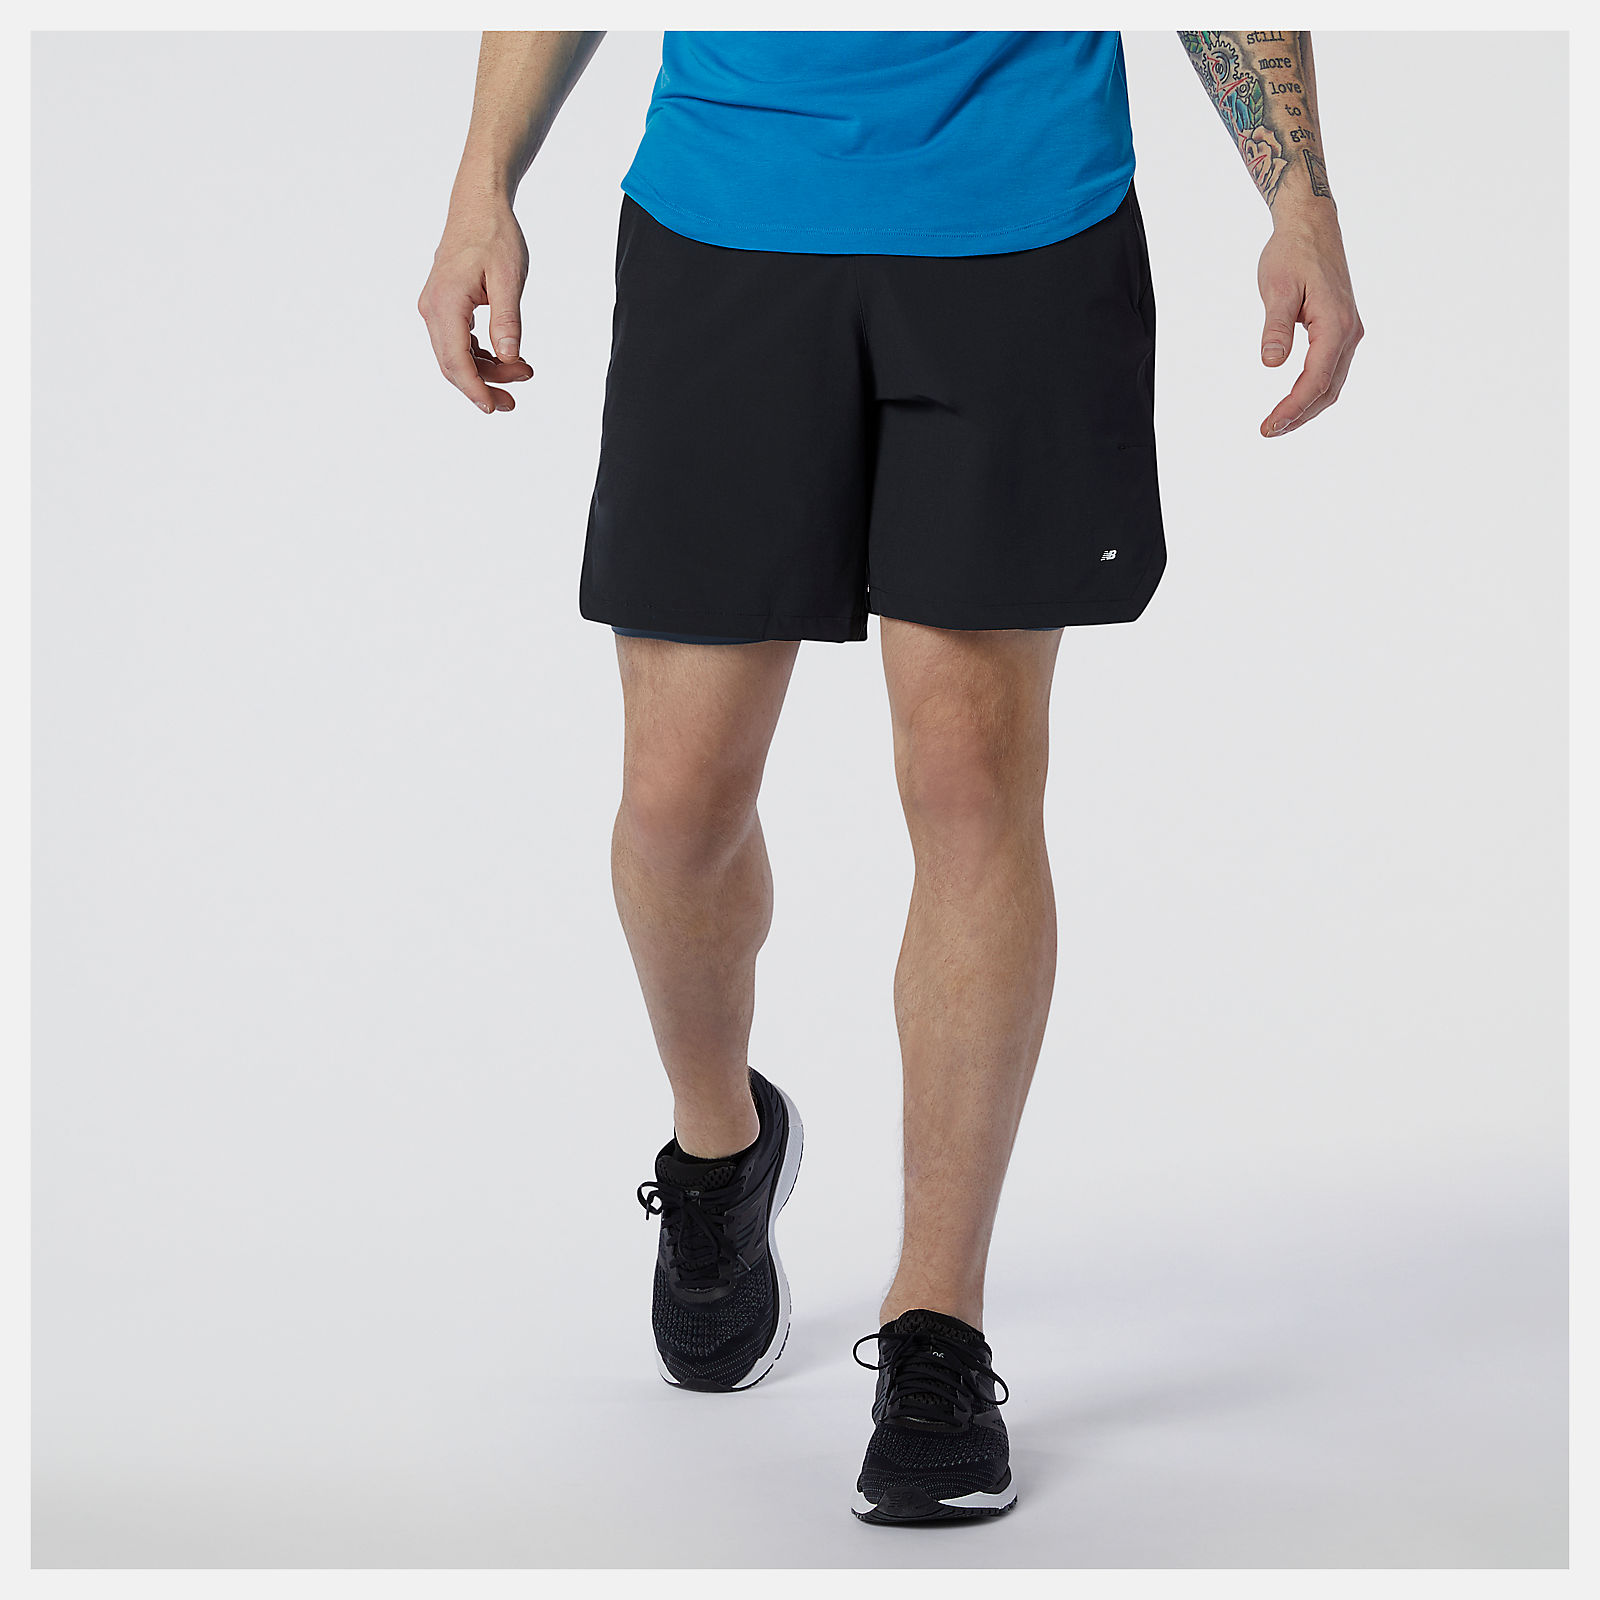 Fortitech 7 inch 2 In 1 Short - New Balance